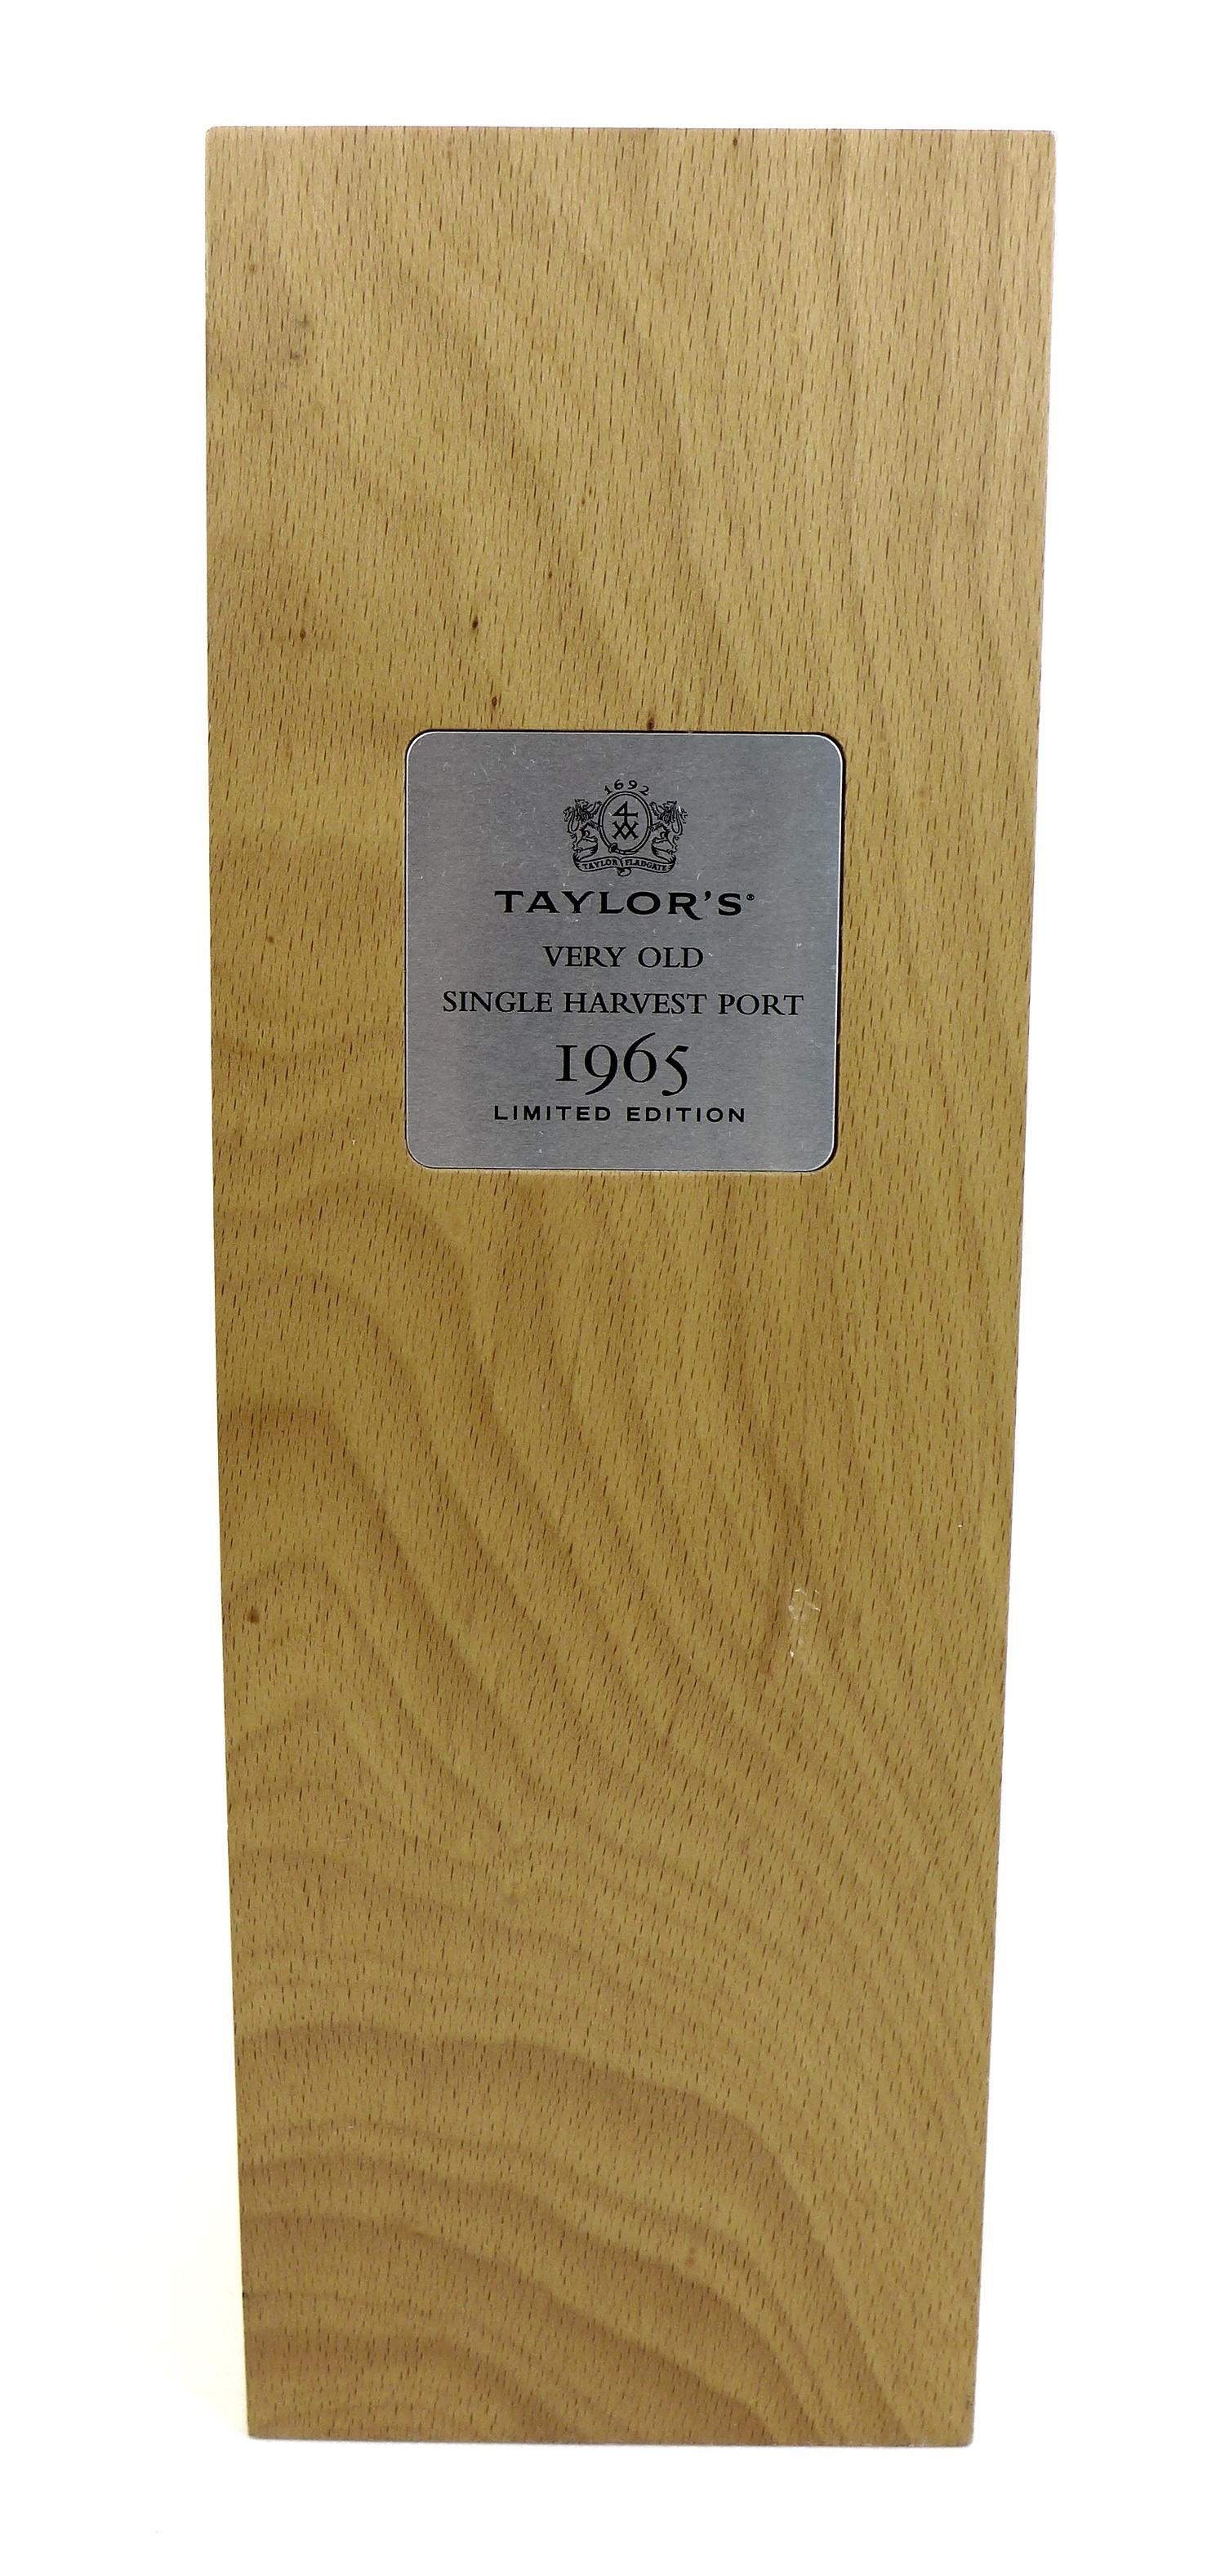 A limited edition bottle of Taylor's 'Very Old Single Harvest 1965' port, with wooden presentation - Image 5 of 5